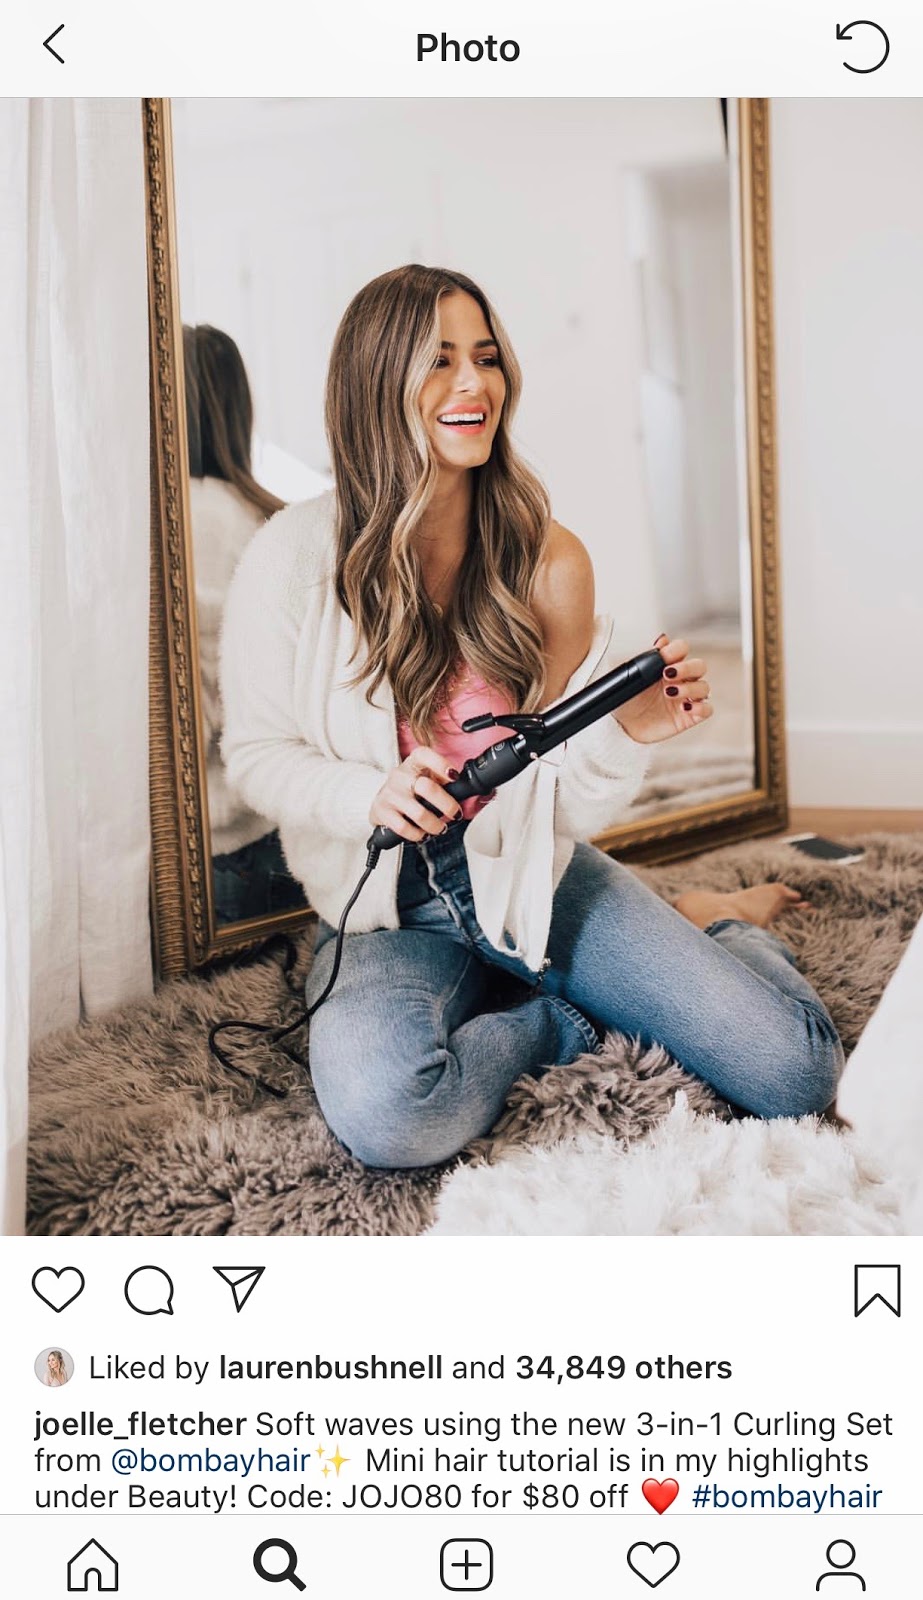 Instagram post by former Bachelor contestant JoJo Fletcher, who is a macro influencer, on her favorite hair tools.